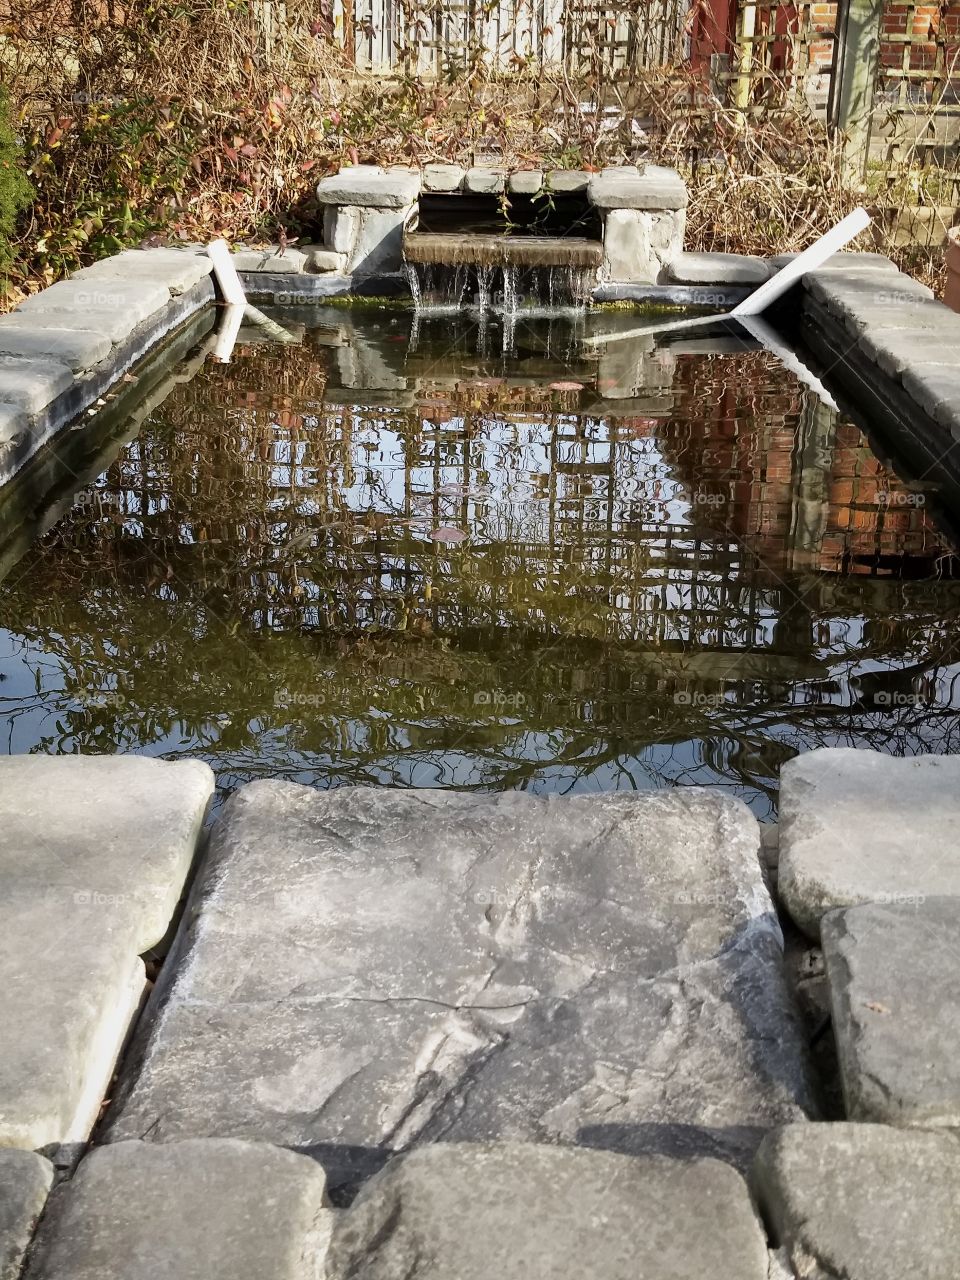 Fountain and koi pond at a city park in Blackwater, Missouri